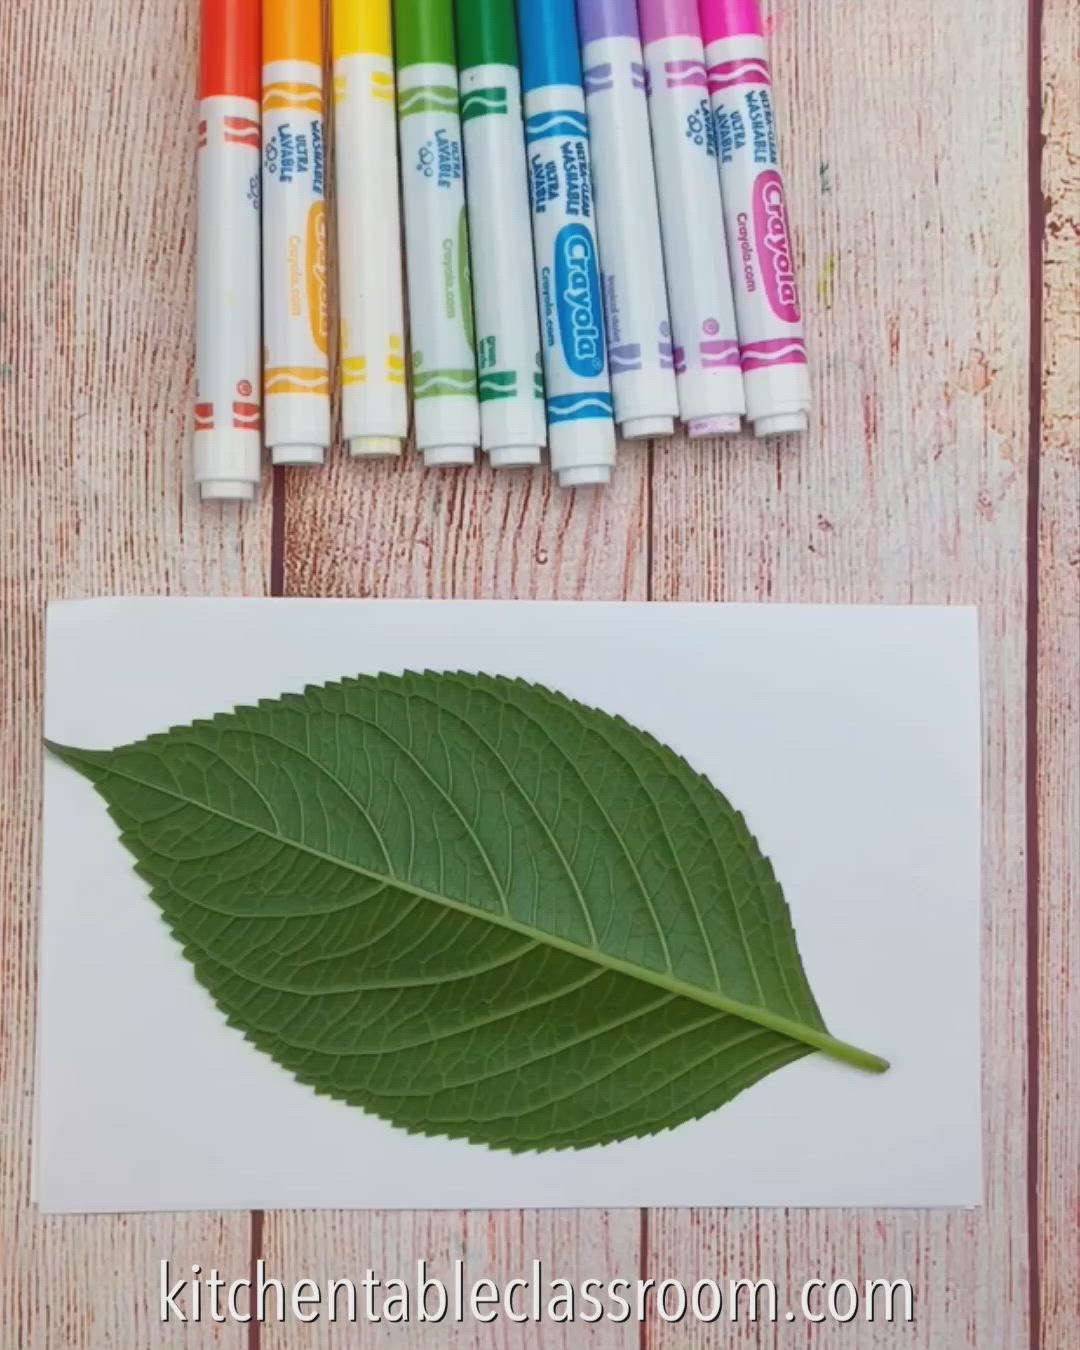 This may contain: colored crayon pencils next to an art project for kids with leaves on them